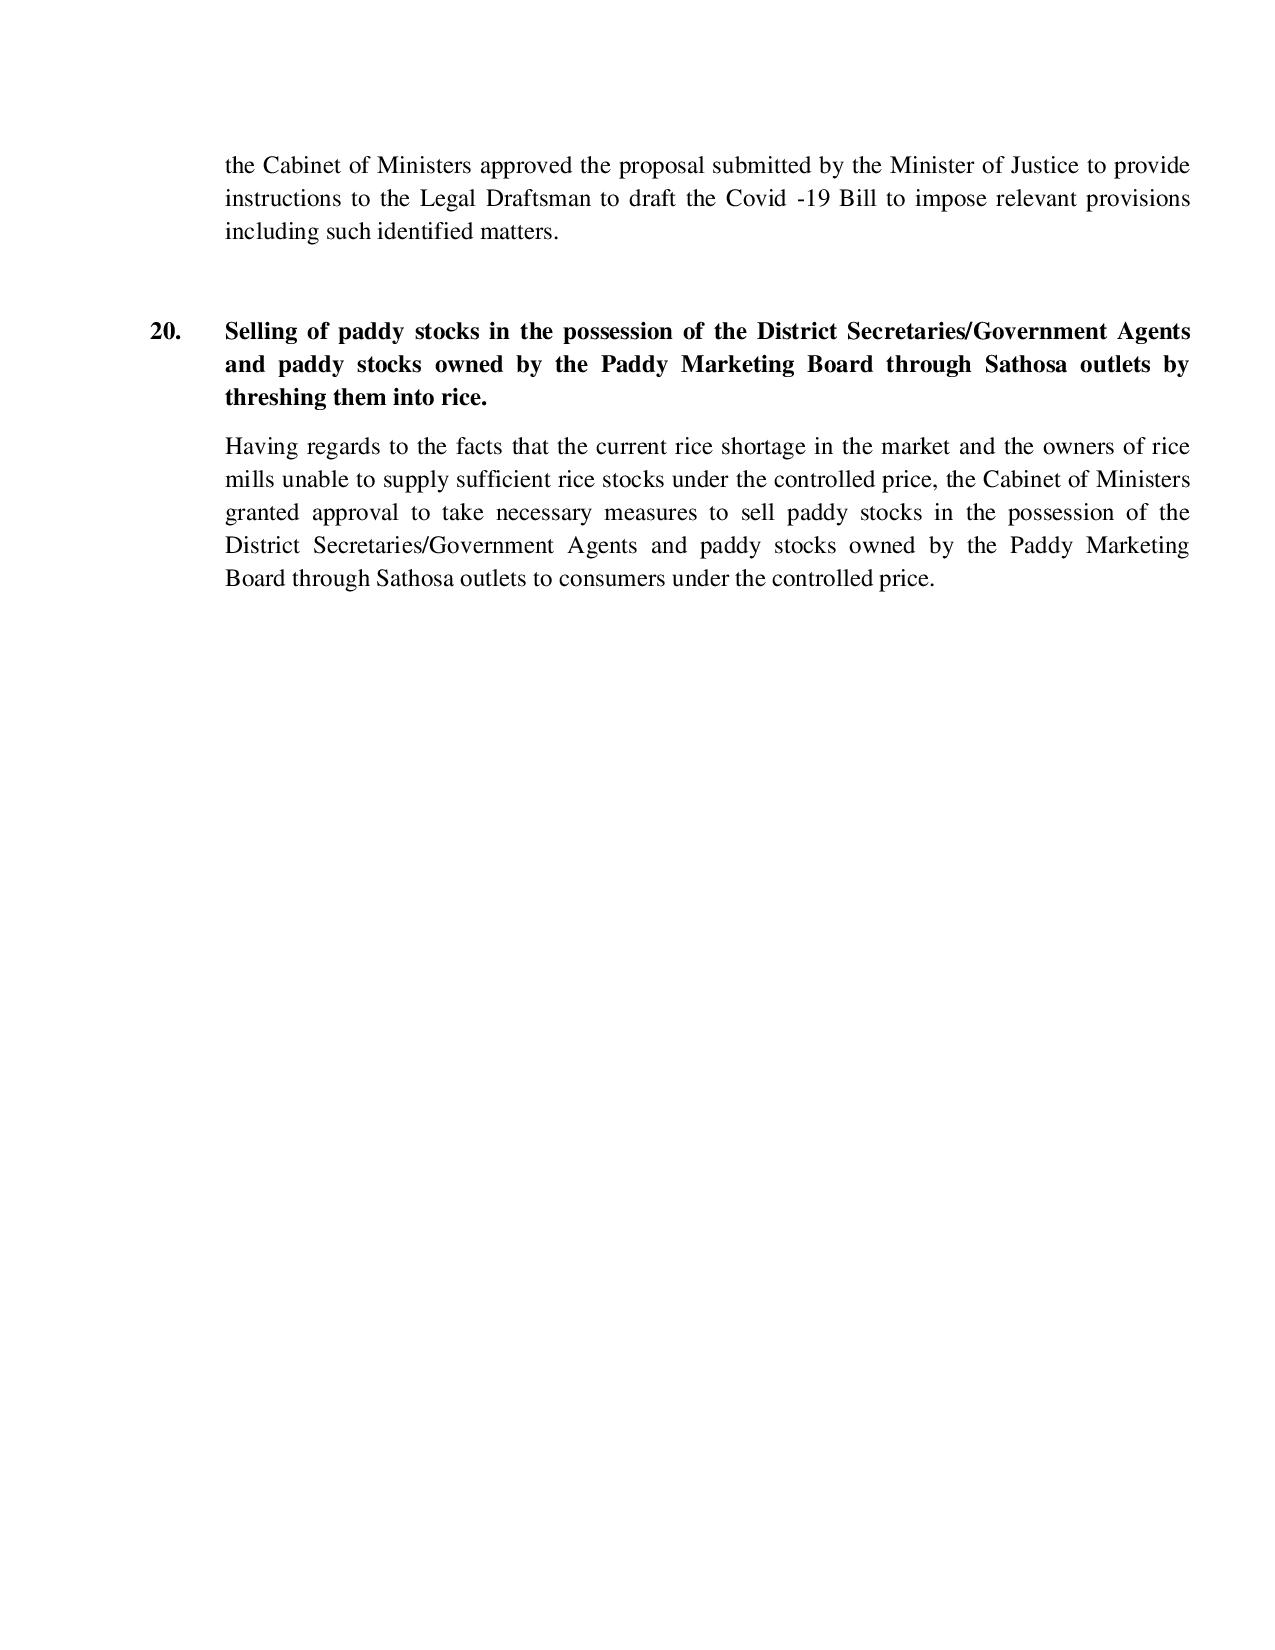 Cabinet Decision on 09.11.2020 English 1 page 007